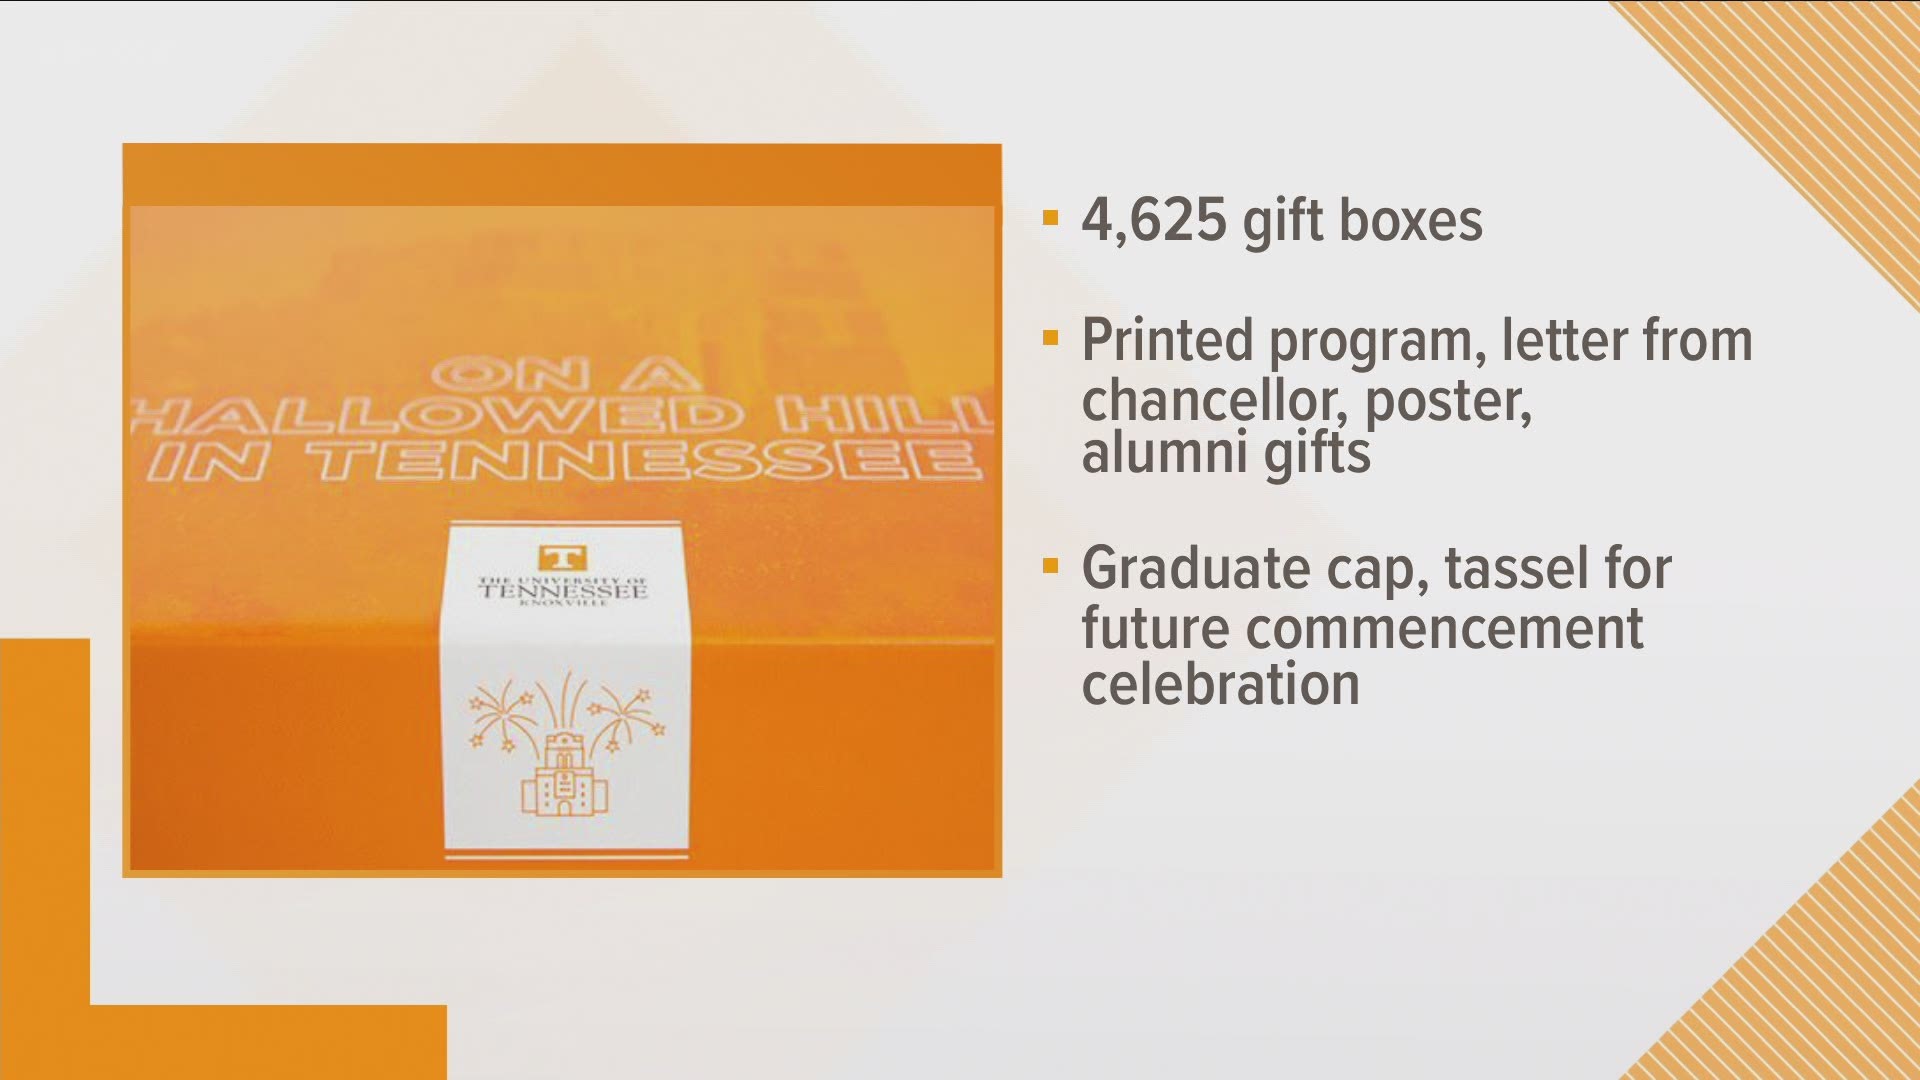 The university is mailing gift boxes to the more than 4,600 graduates.